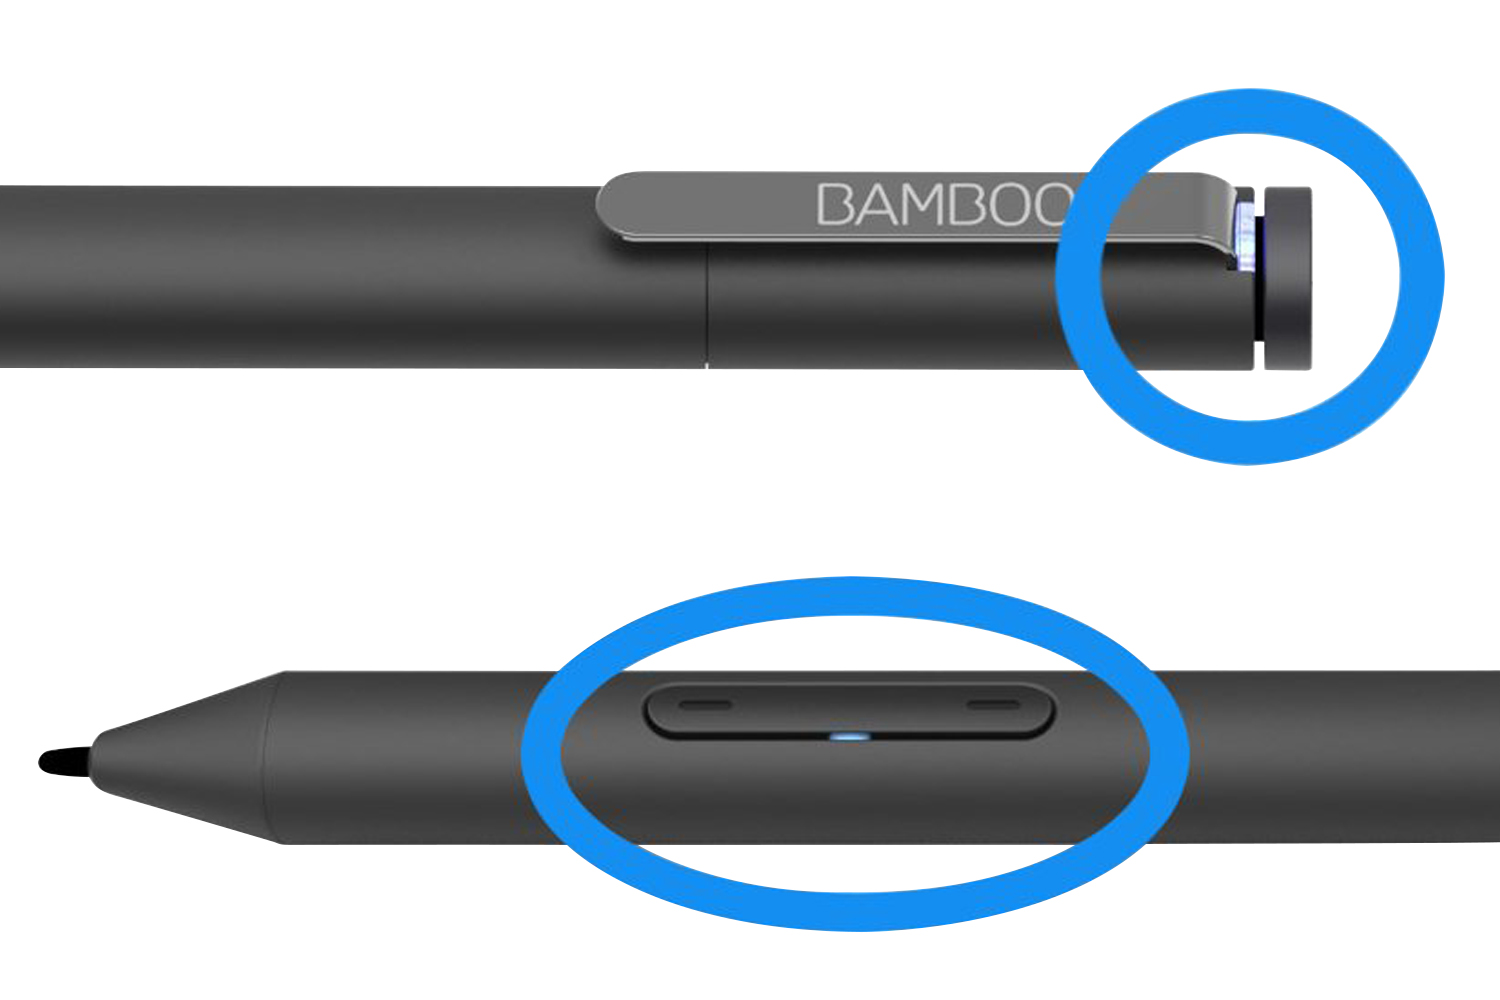 how to change bamboo ink stylus key binds